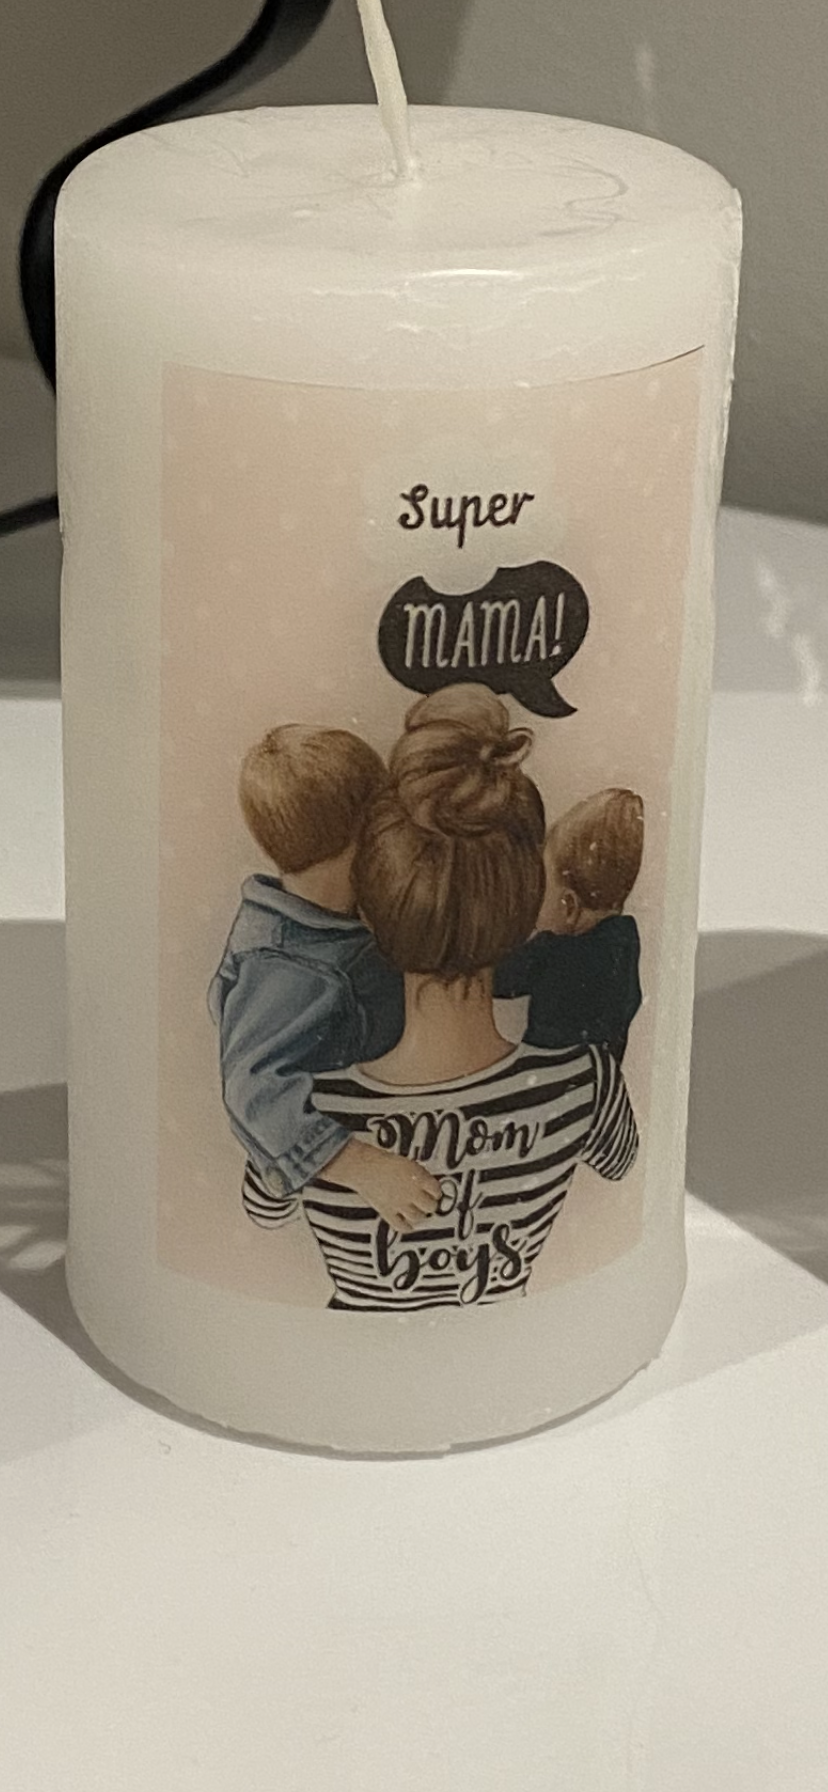 All Our Mothers Day Printed Candles  3 sizes available